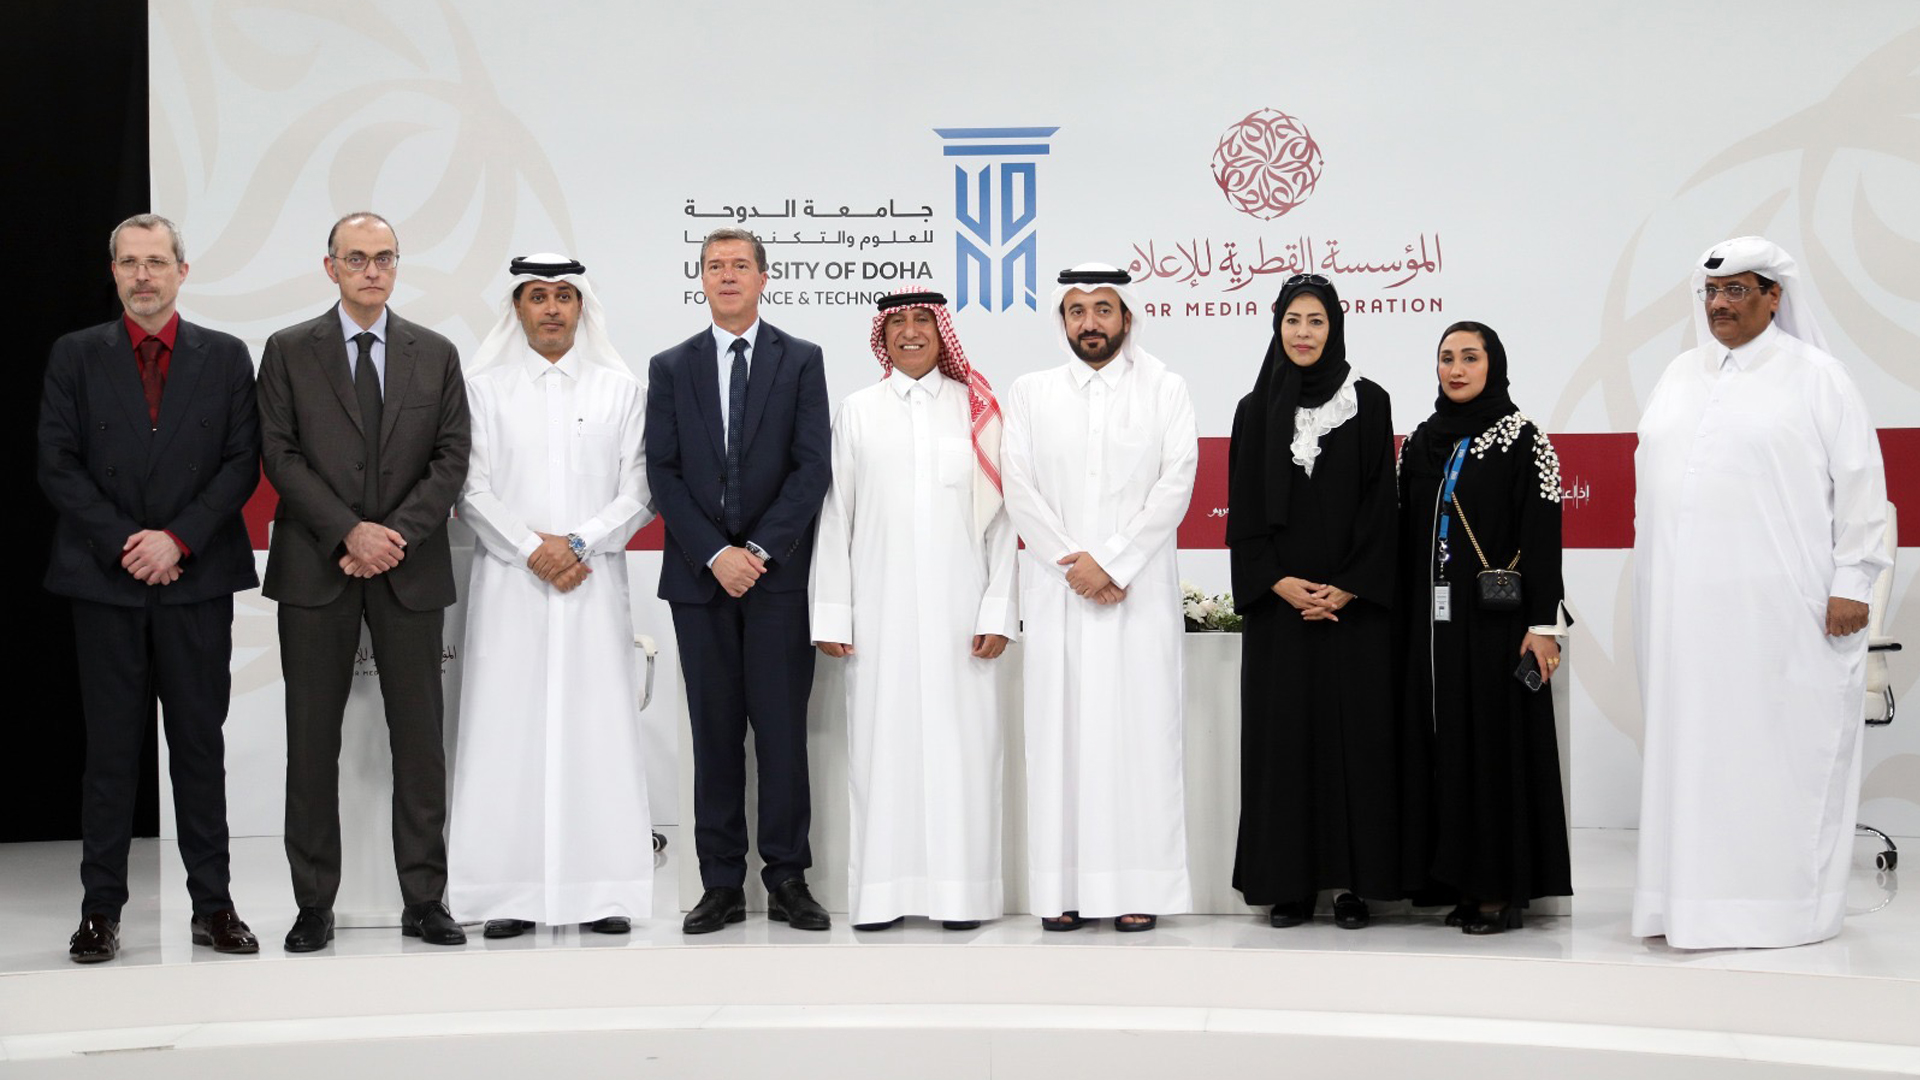 MoU inked by QMC, University of Doha for Science and Technology to bolster Qatar’s media, tech education